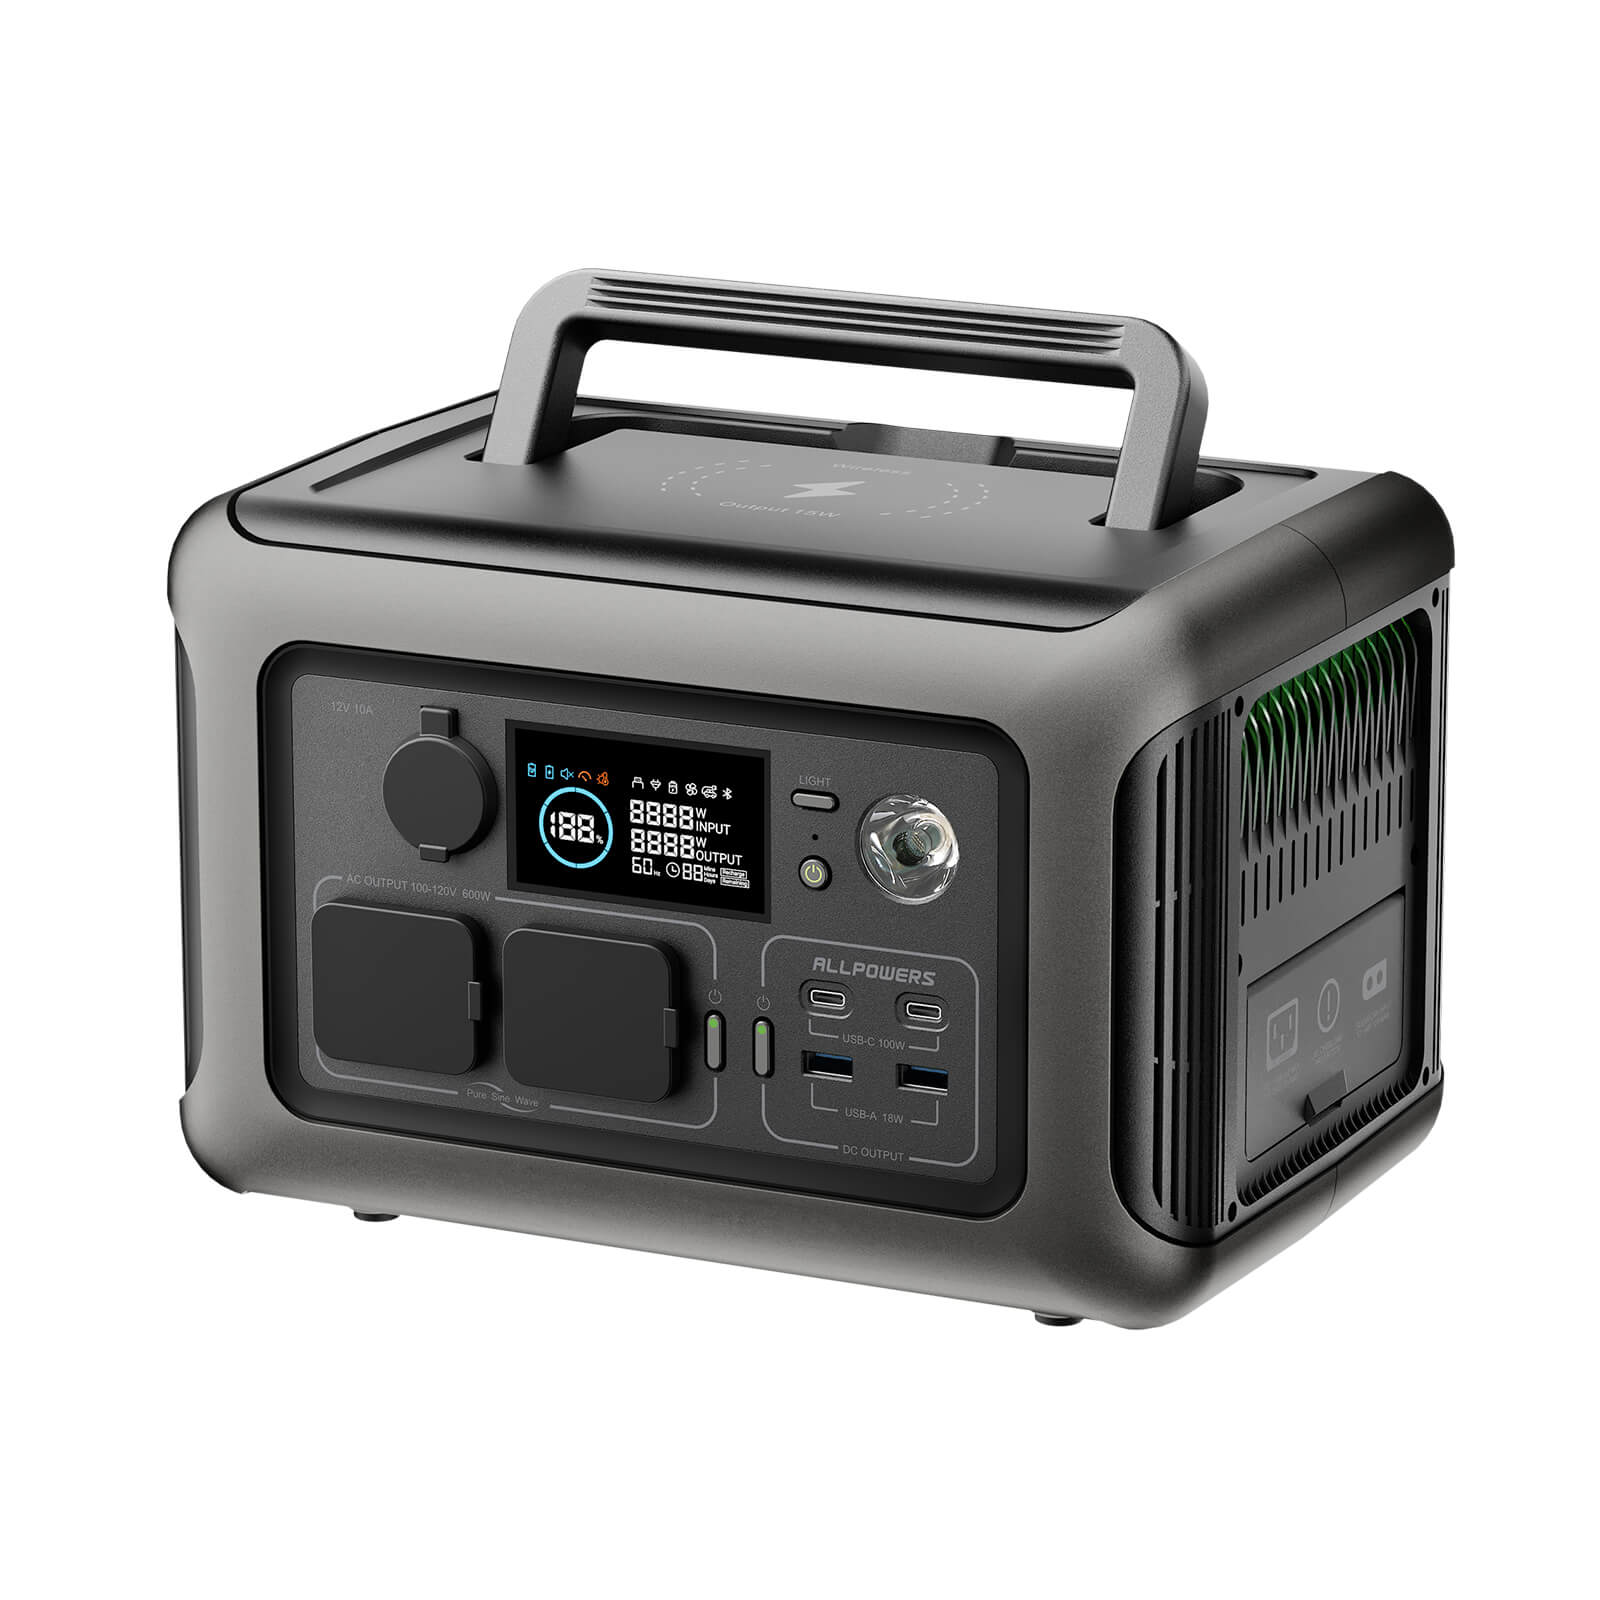 ALLPOWERS R600 Portable Power Station 600W 299Wh LiFeP04 Battery